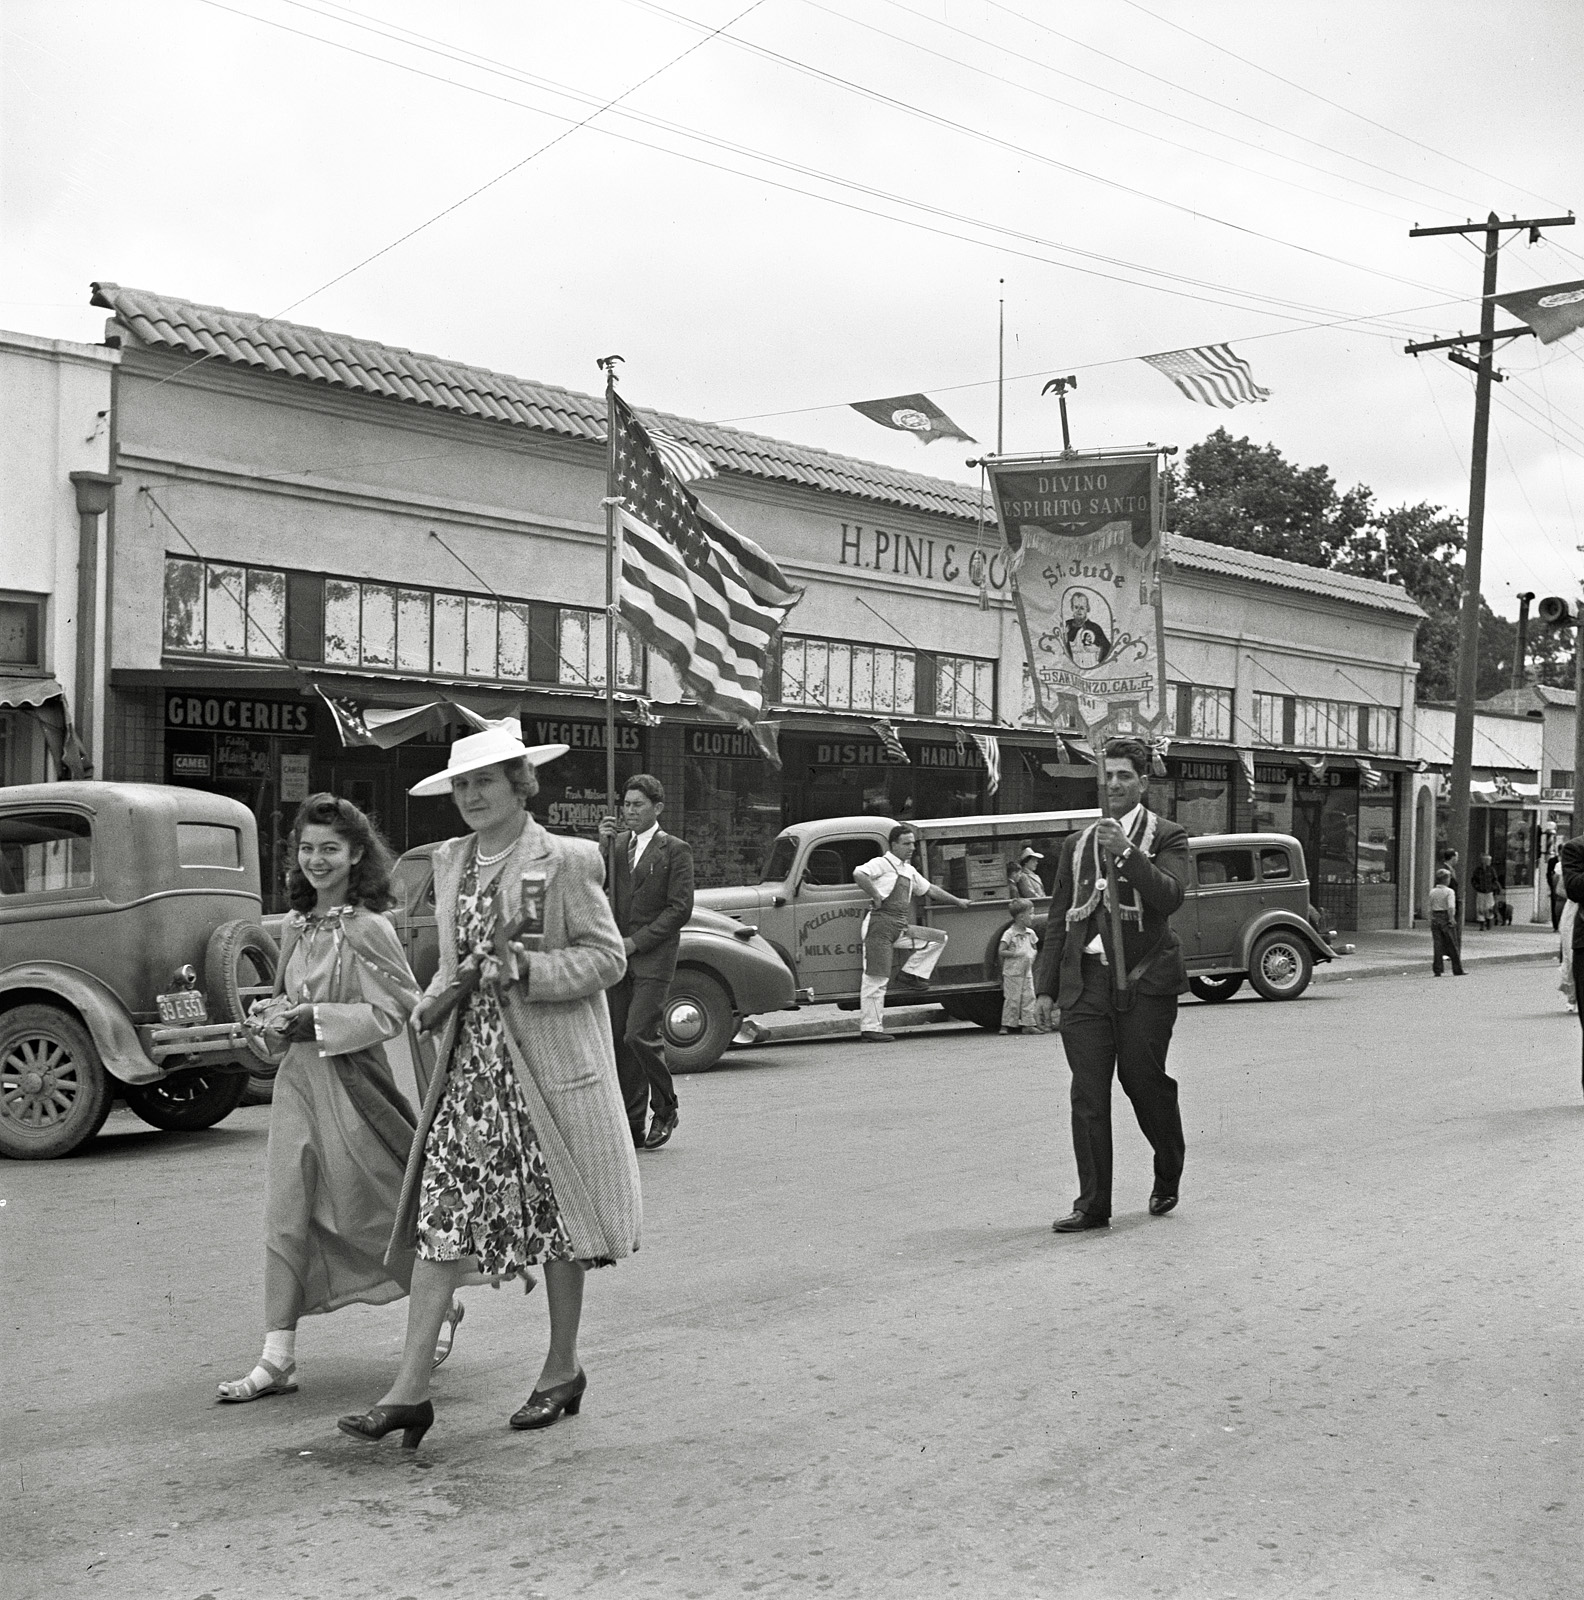 May 1942. "In the parade of the Festival of the Holy Ghost, a Portuguese-American celebration. Novato, California." Medium format negative by Russell Lee for the Office of War Information. View full size.